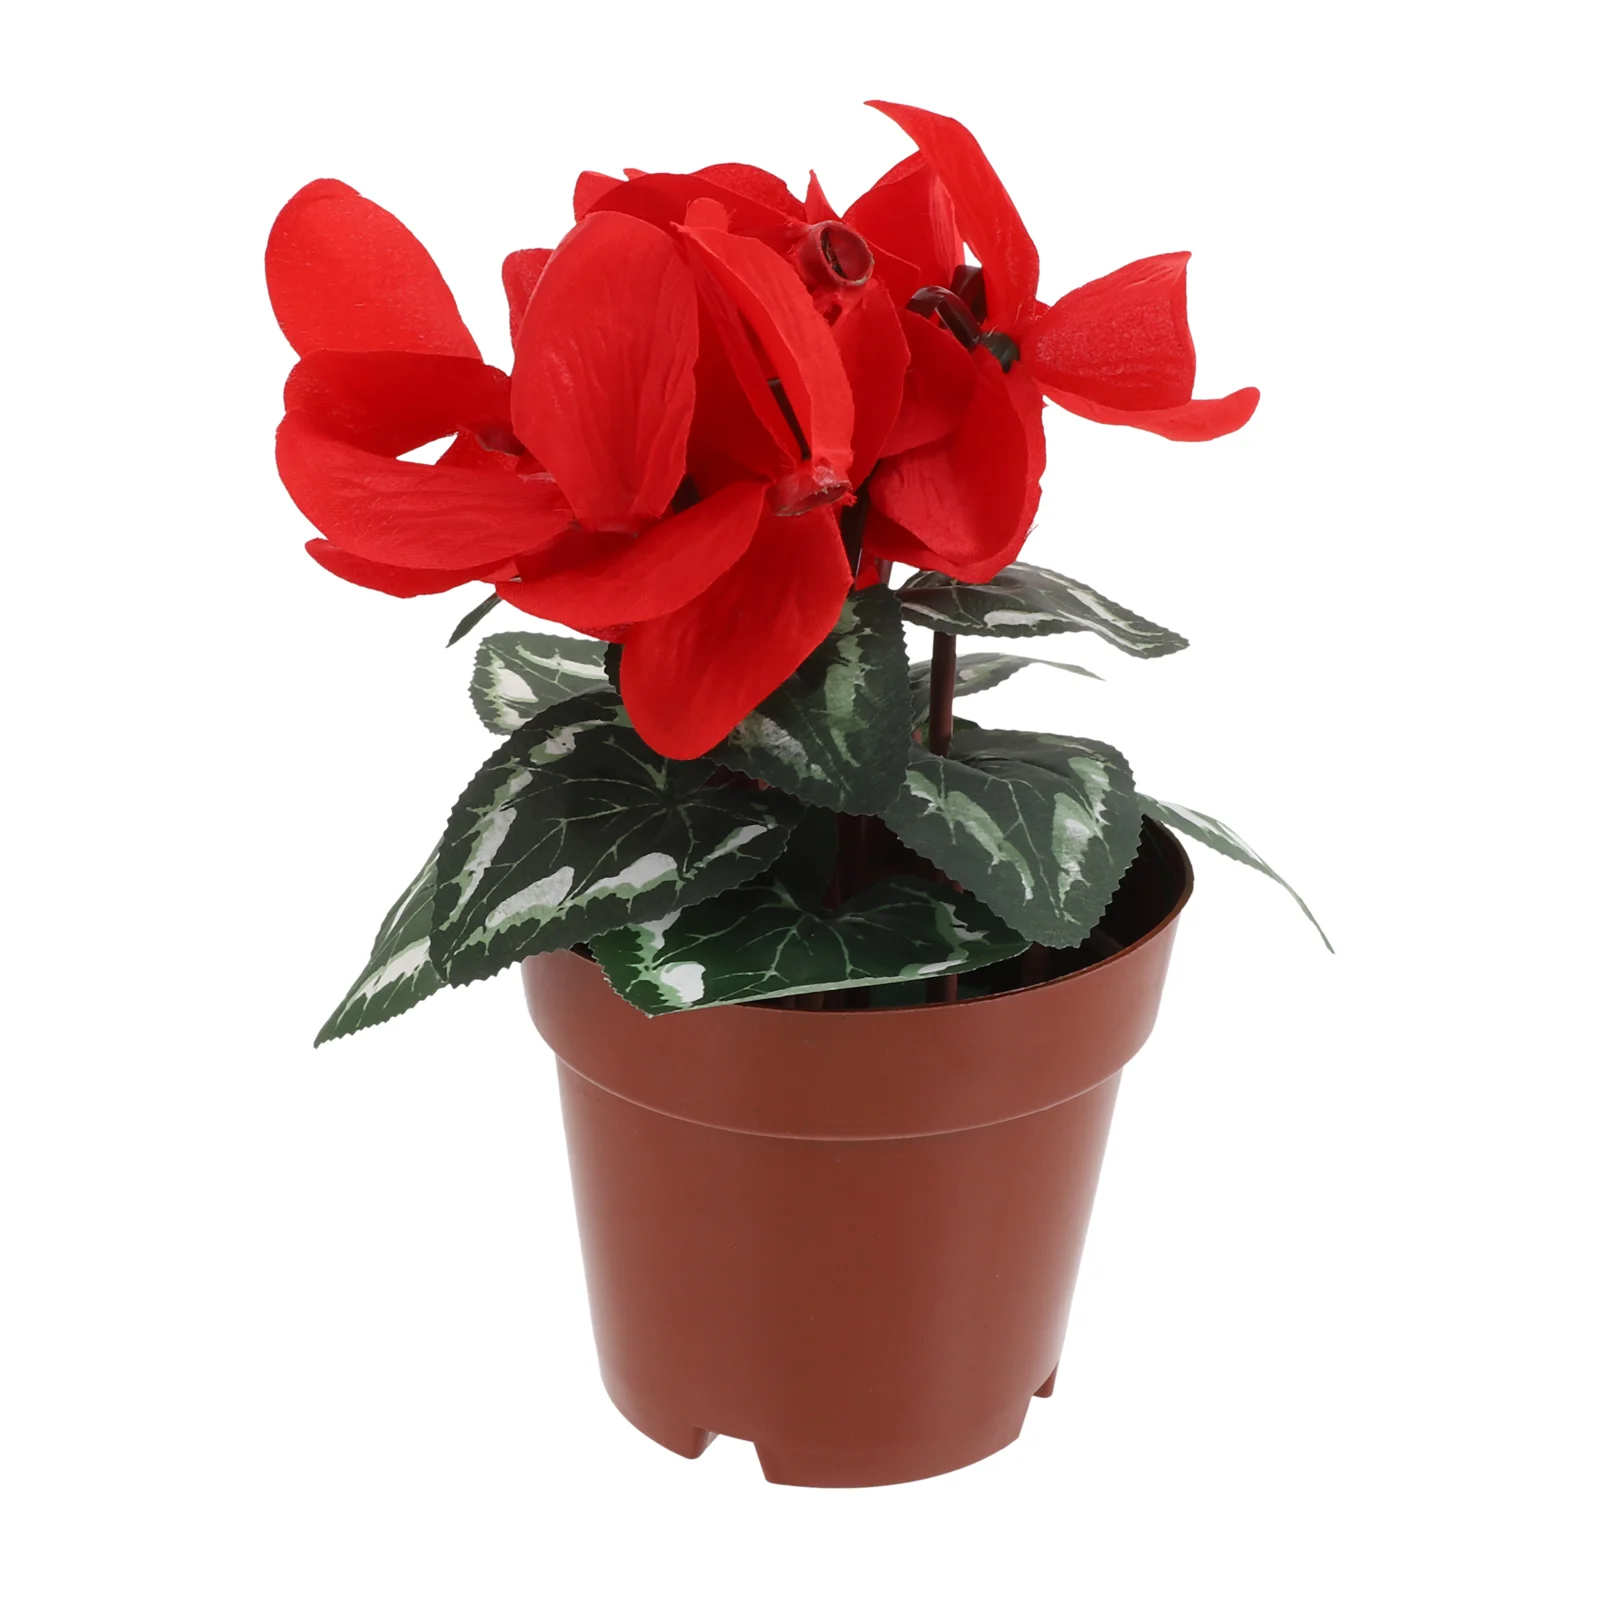 

Potted Lifelike Cyclamen Flower Artificial Adornment Fake Bonsai Wedding Decor Flowers Are Silk Household Green Home